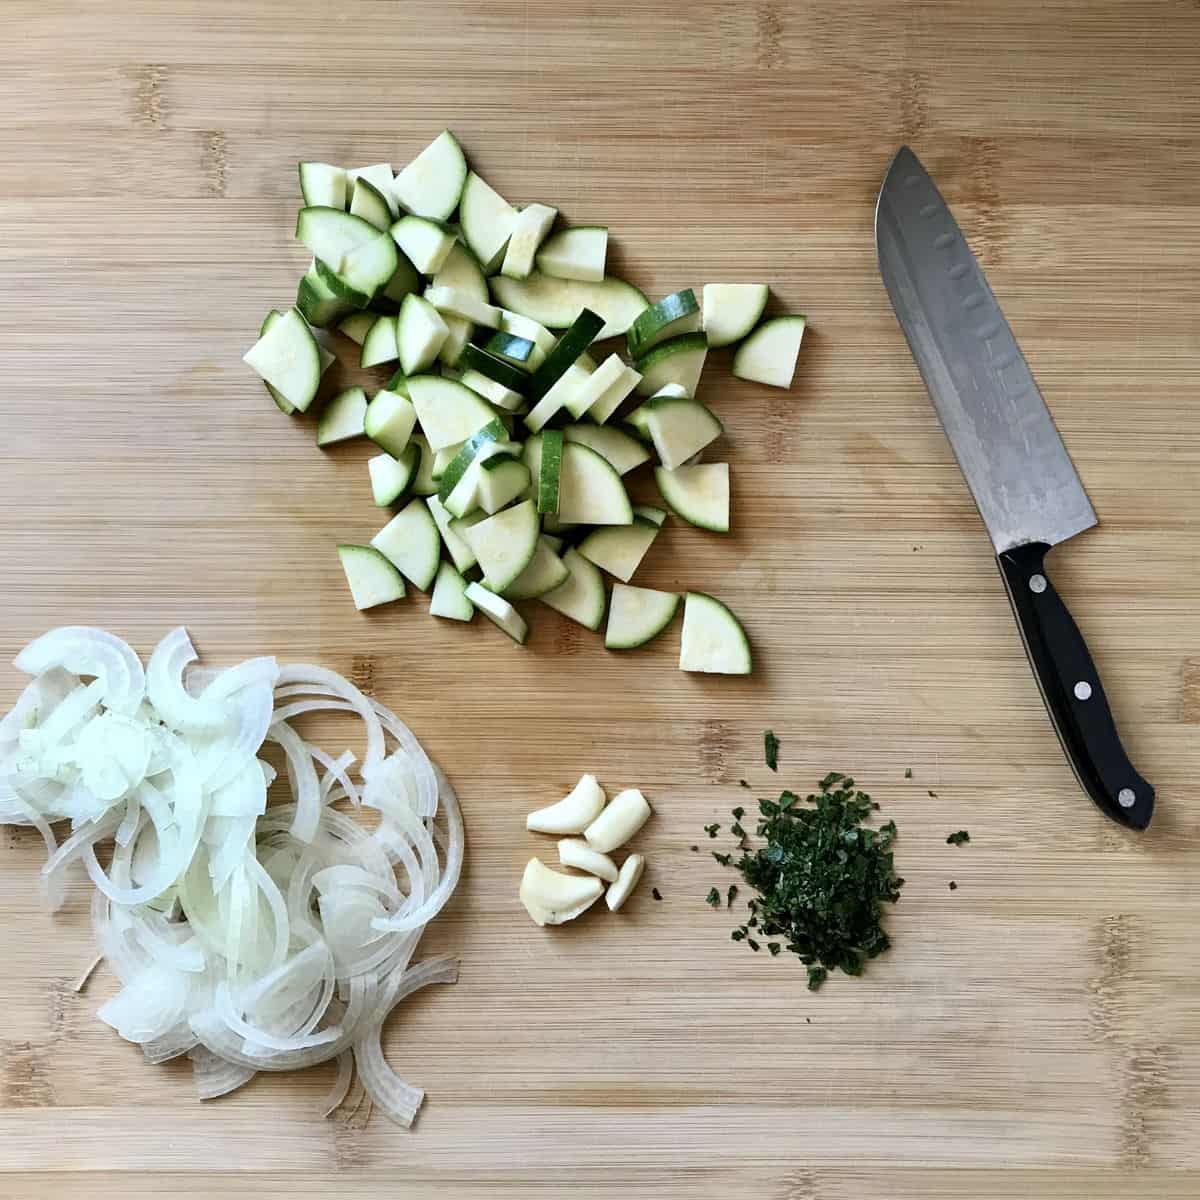 Sliced onions, quartered zucchini, minced parsley and sliced garlic on a wooden board.